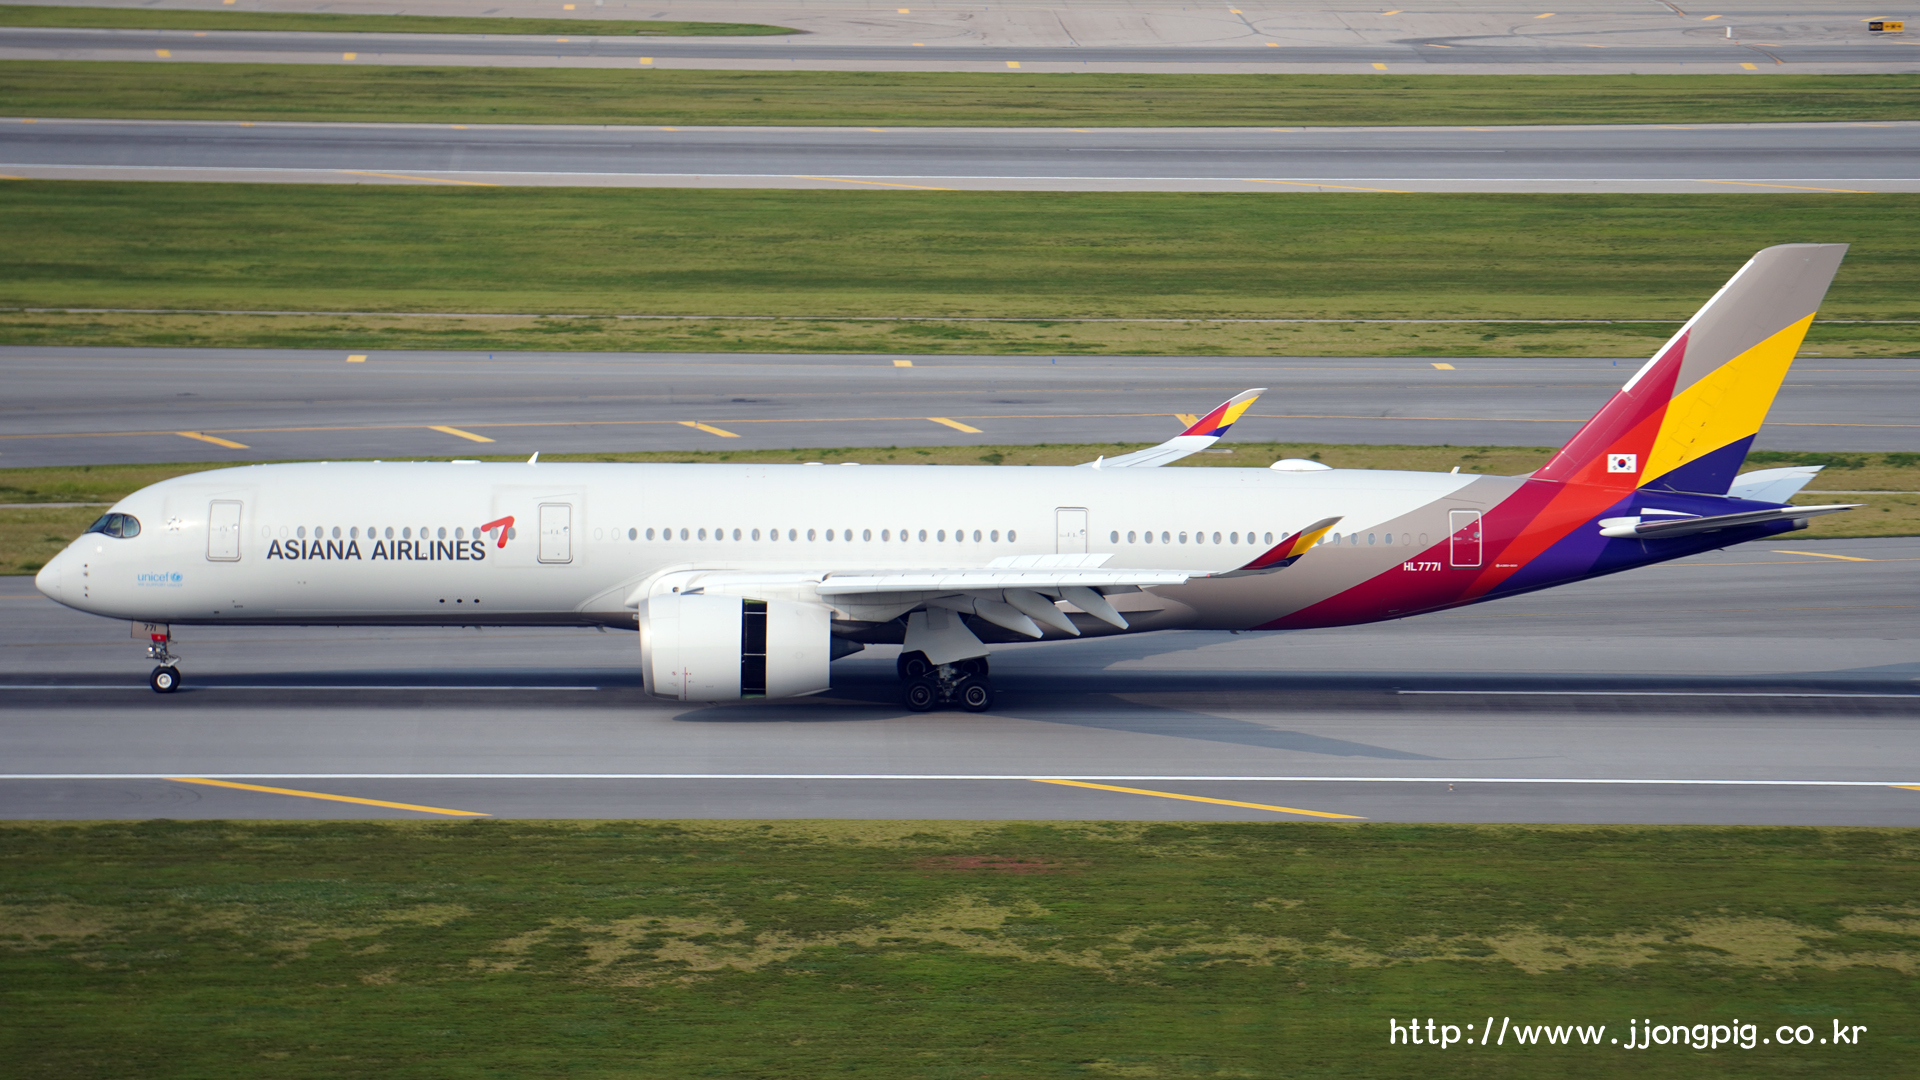 alt=Asiana Airlines HL7771 Airbus A350-900